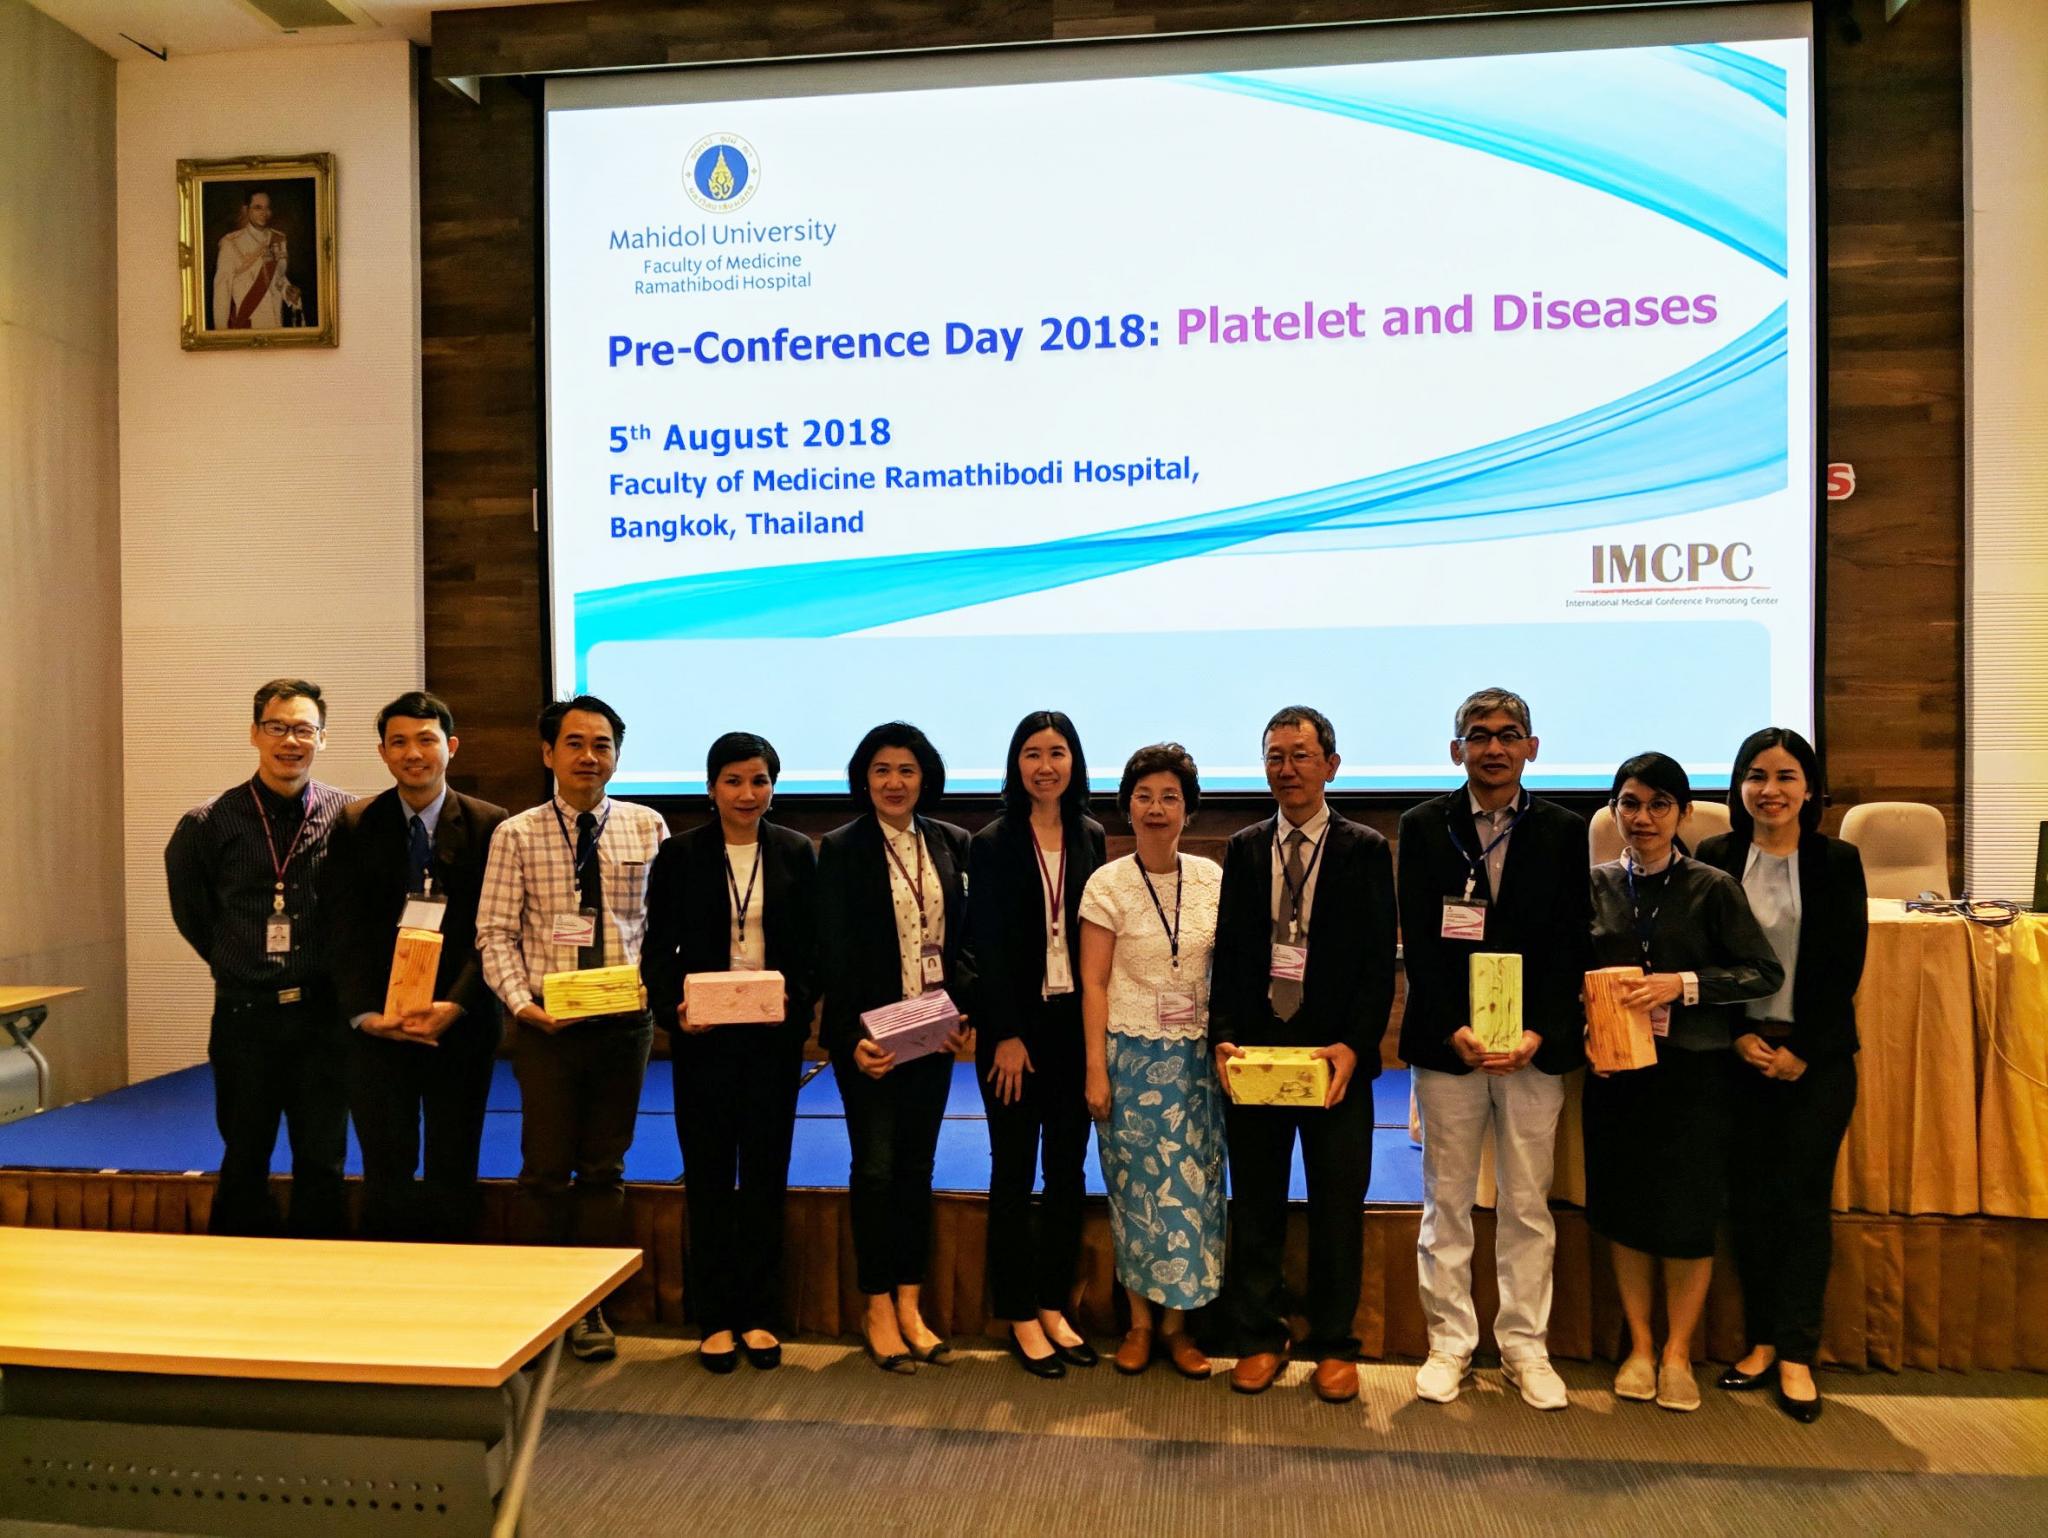 Pre-Conference Day 2018 Platelet and Diseases